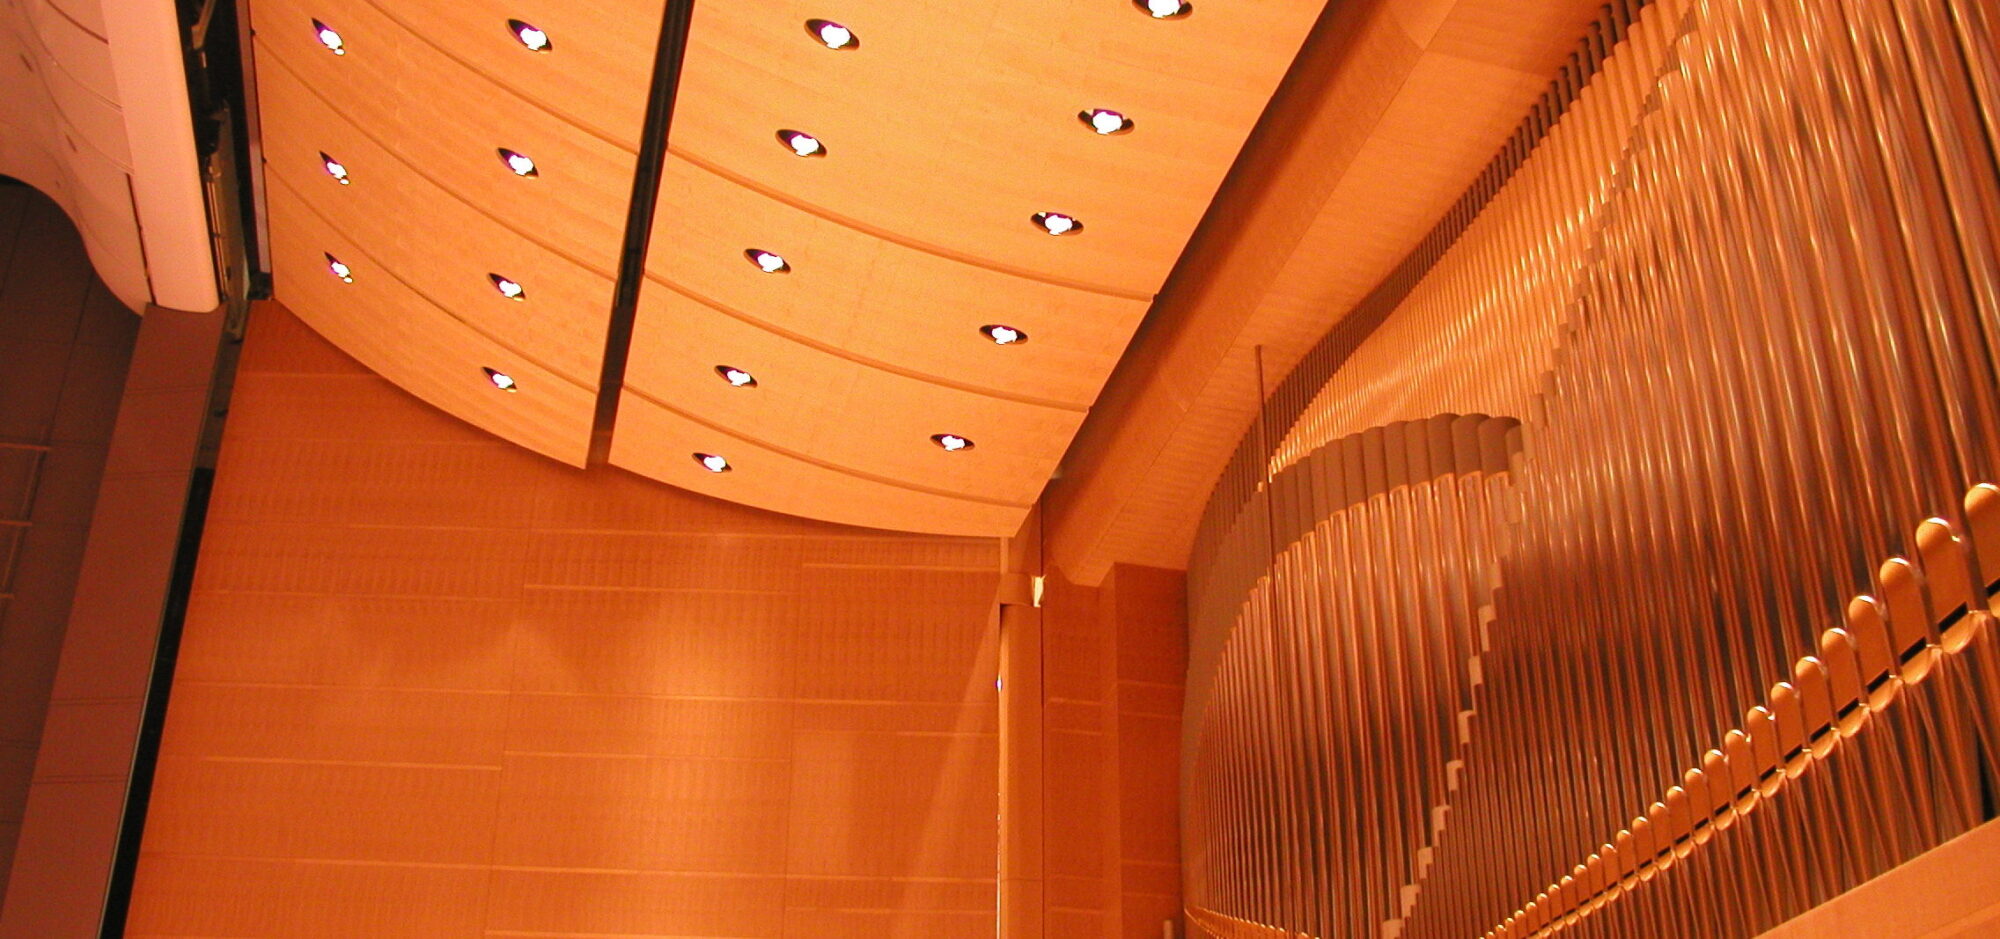 Glenn Rieder provided veneer management services and high-end commercial millwork fabrication for this architectural landmark, Overture Center for the Arts.